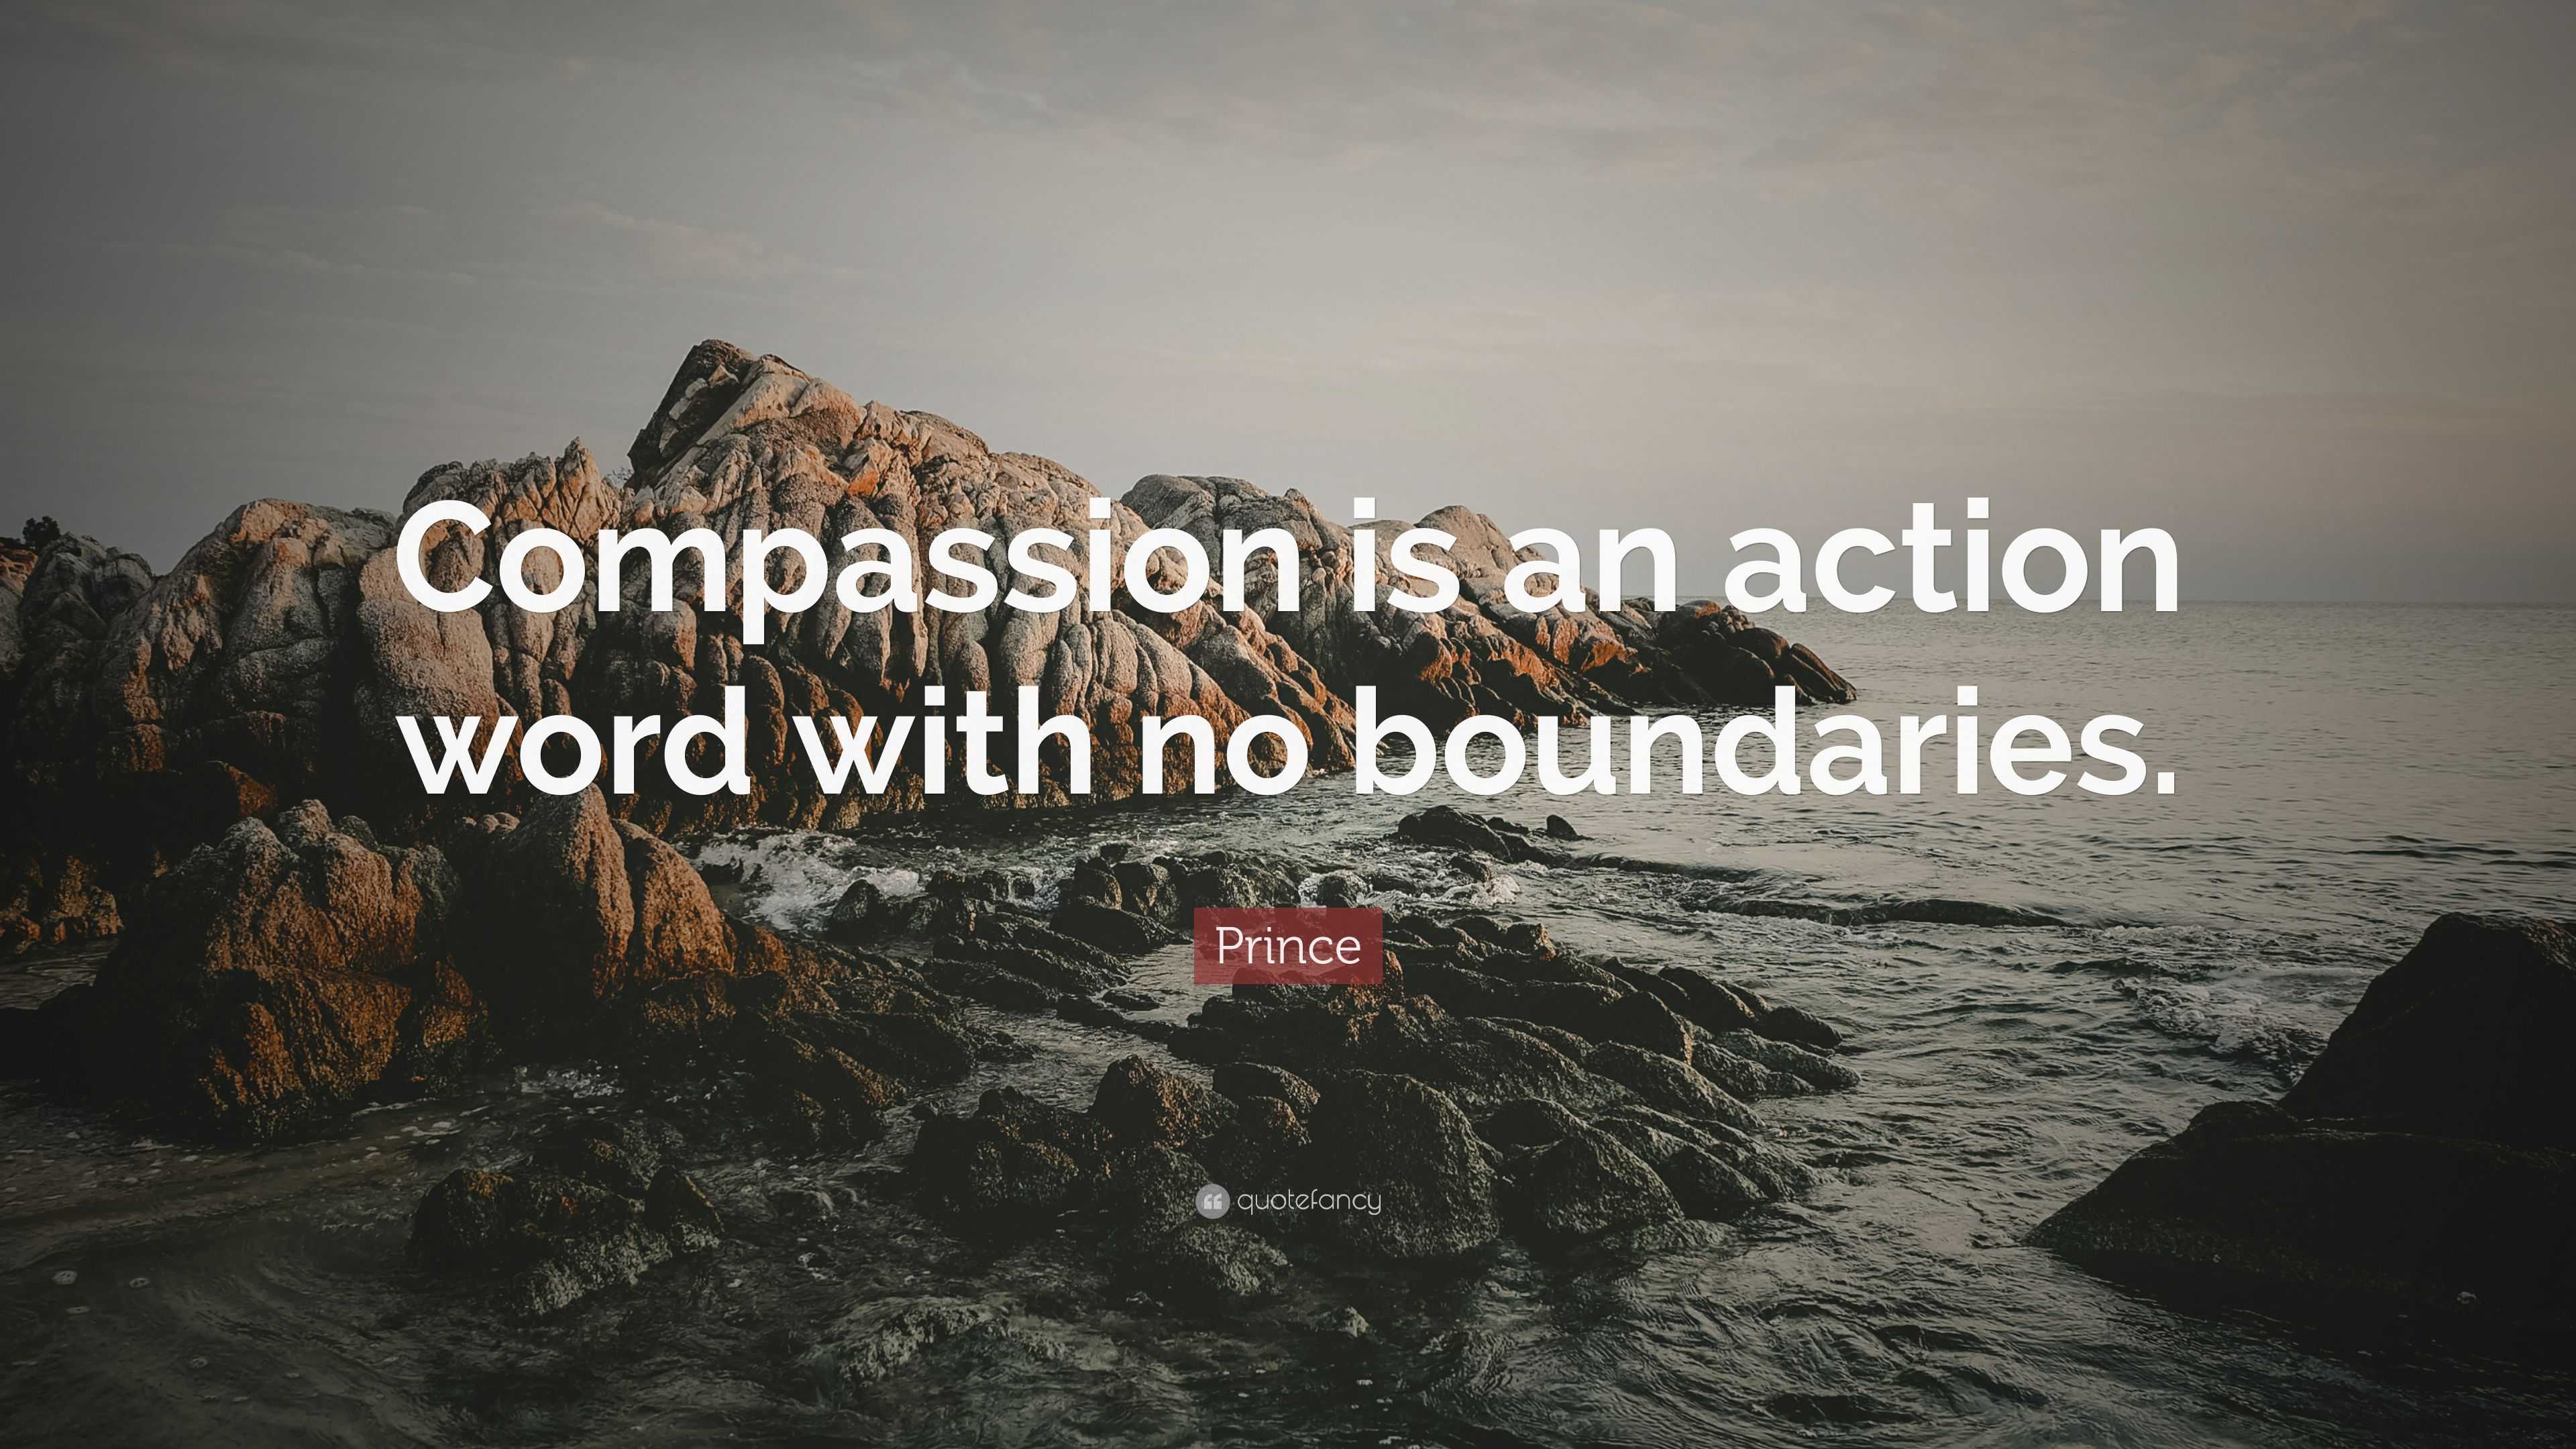 Prince Quote: "Compassion is an action word with no boundaries." (12 wallpapers) - Quotefancy